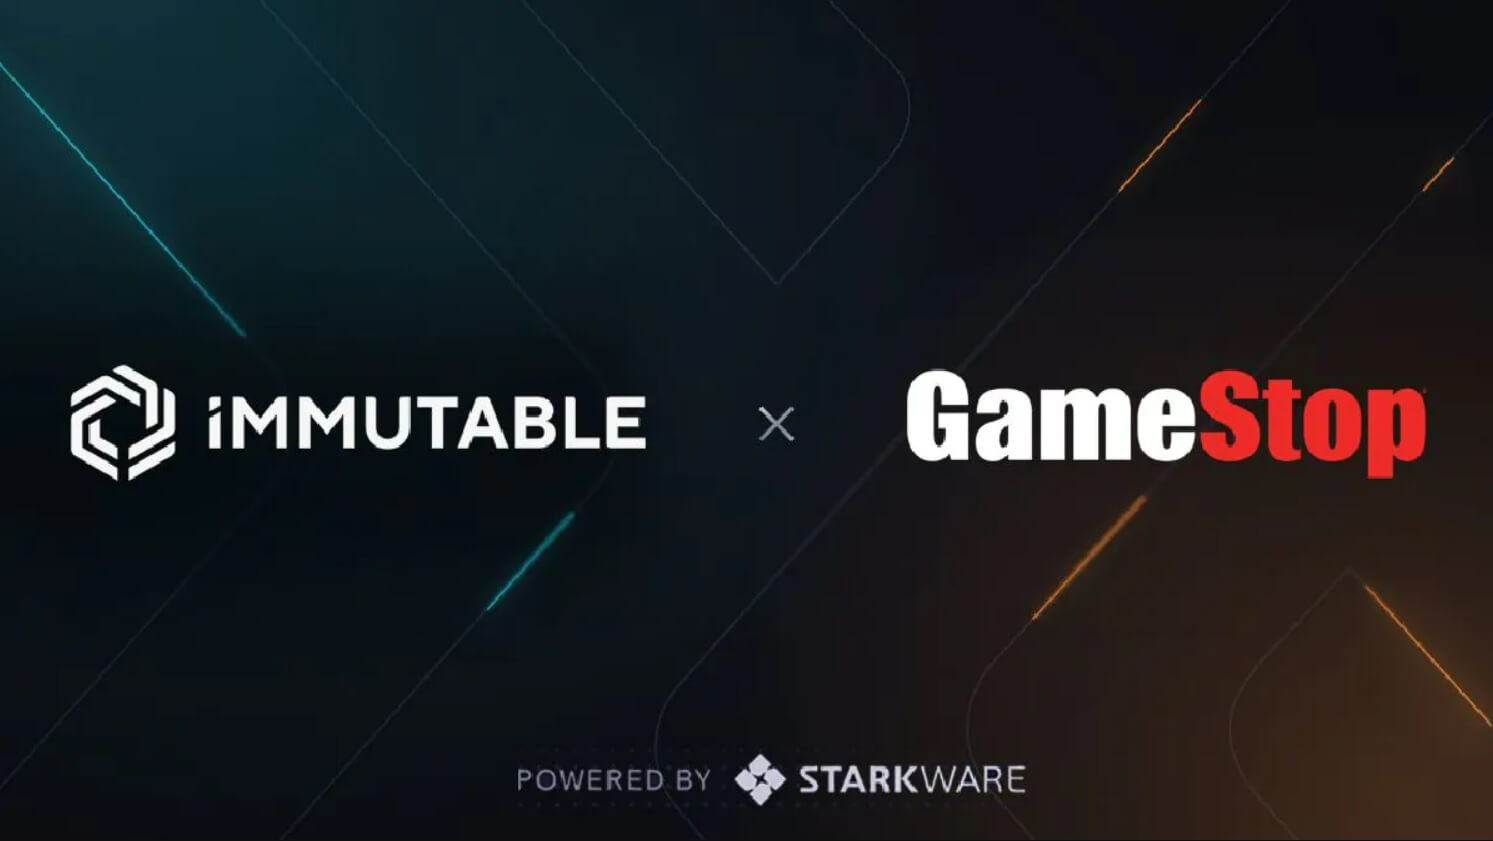 The GameStop Wallet is now Available on Immutable X